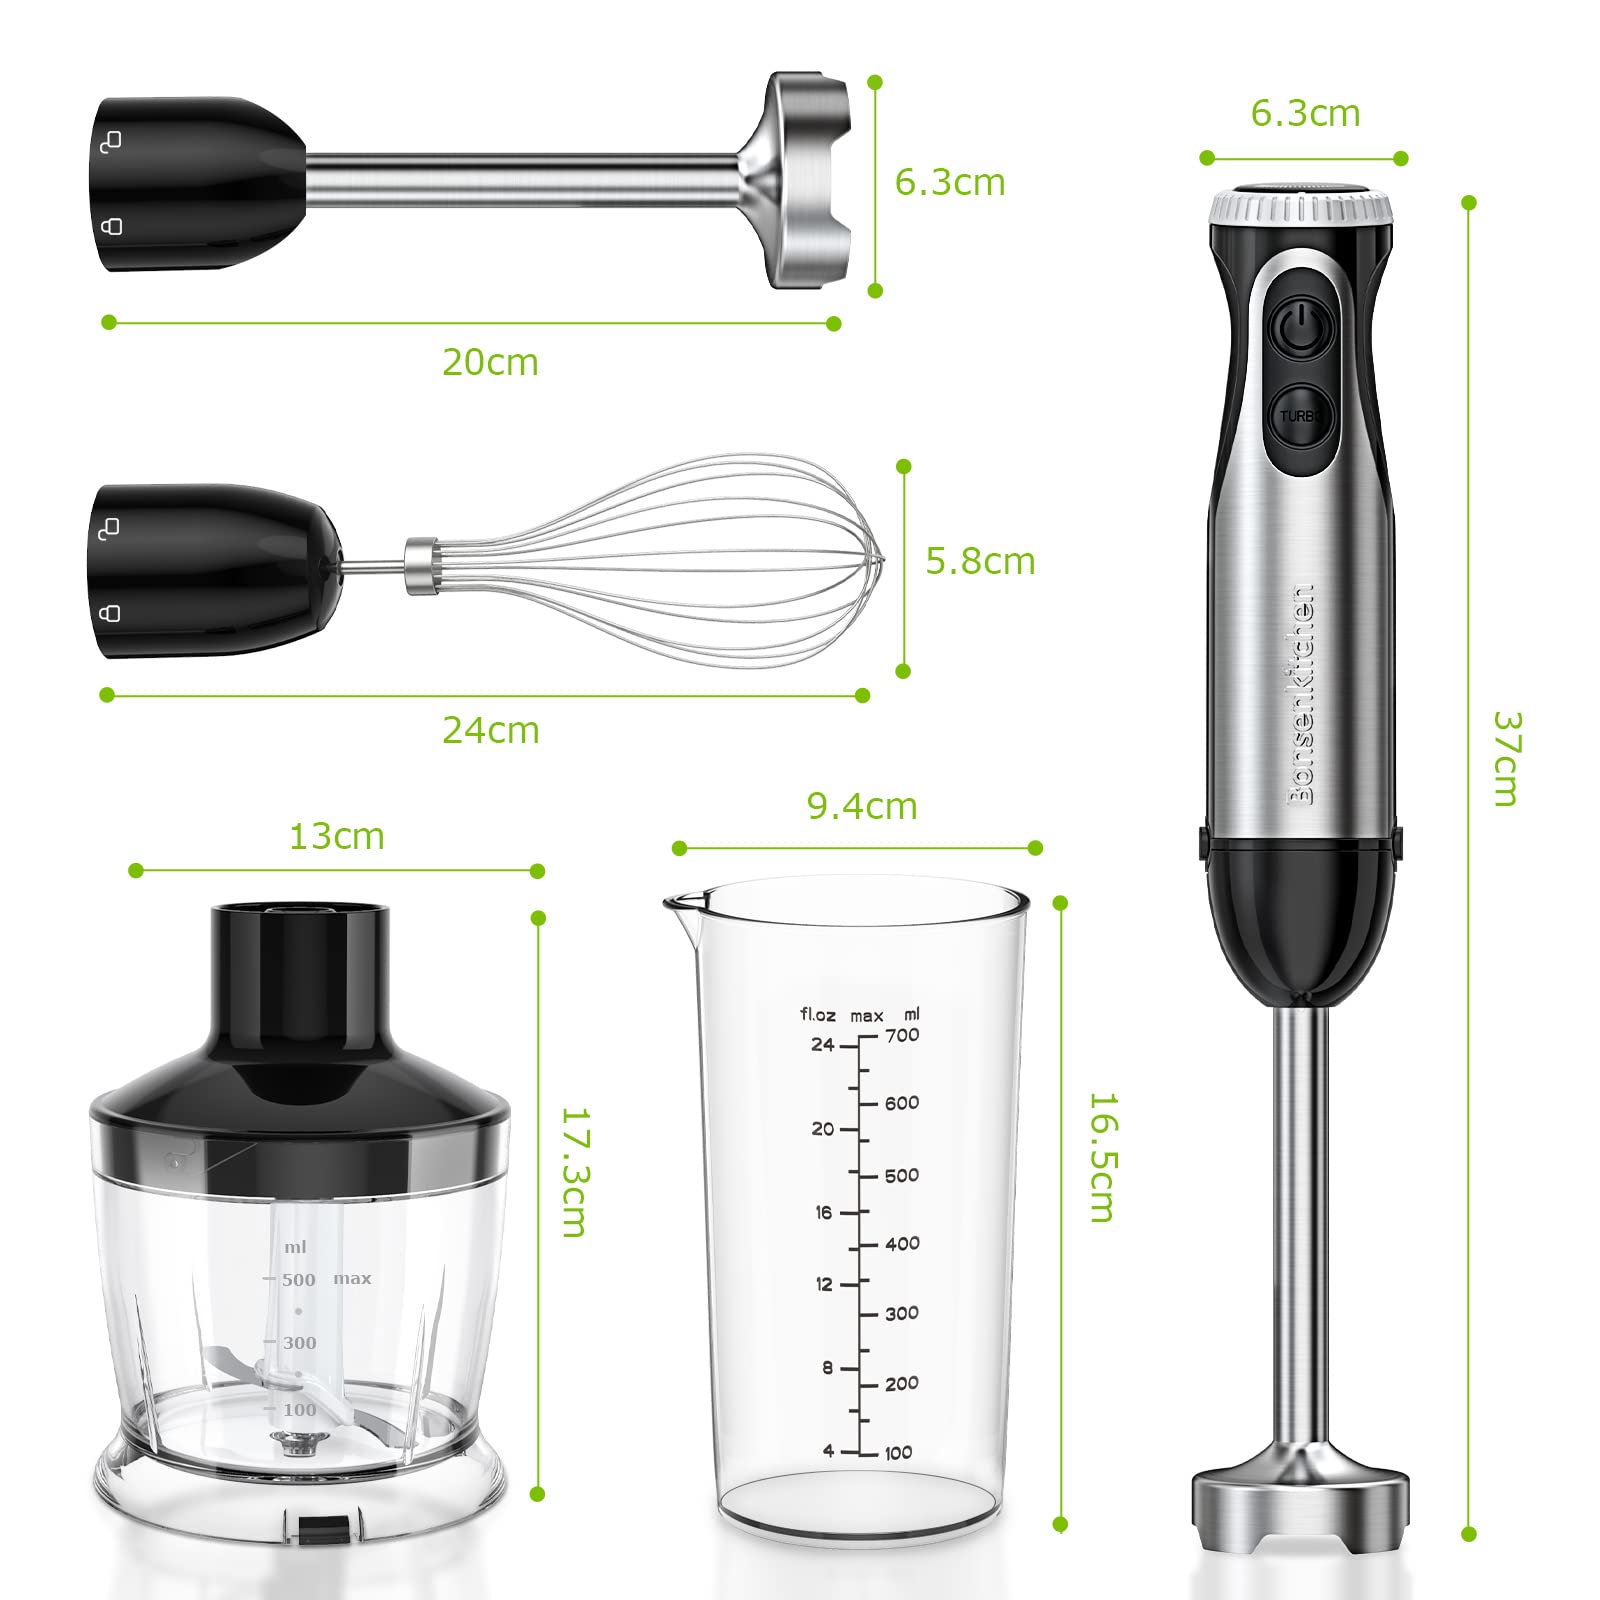 Bonsenkitchen Stainless Steel Hand Blender, 4-in-1 Stick Blender 1000W, 20 Speed Adjustable, with Whisk, 500ml Chopper and 700ml Measuring Cup, Food Processor (HB3203)